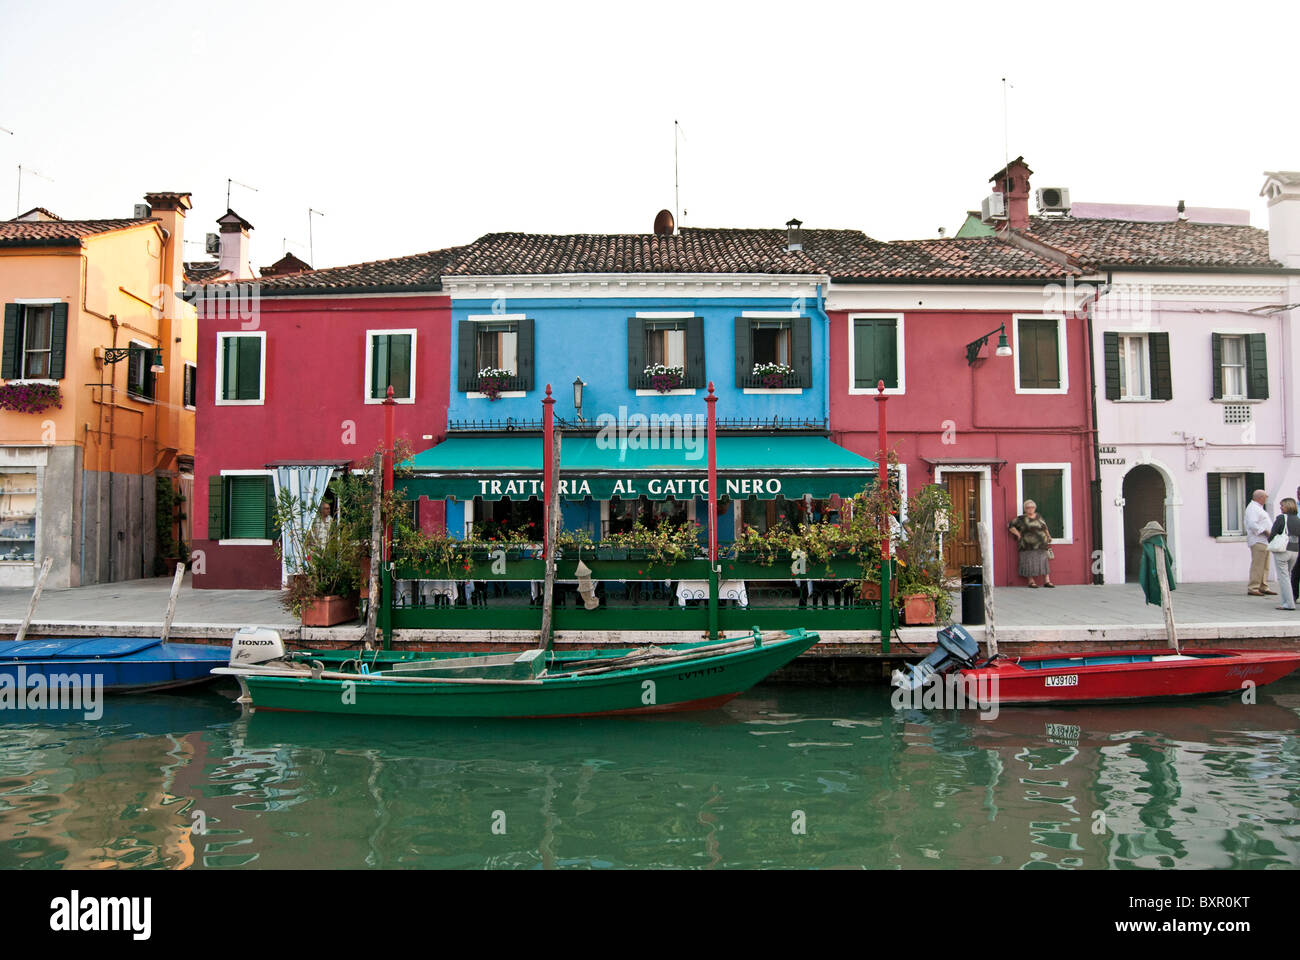 Gatto Nero Restaurant High Resolution Stock Photography and Images - Alamy